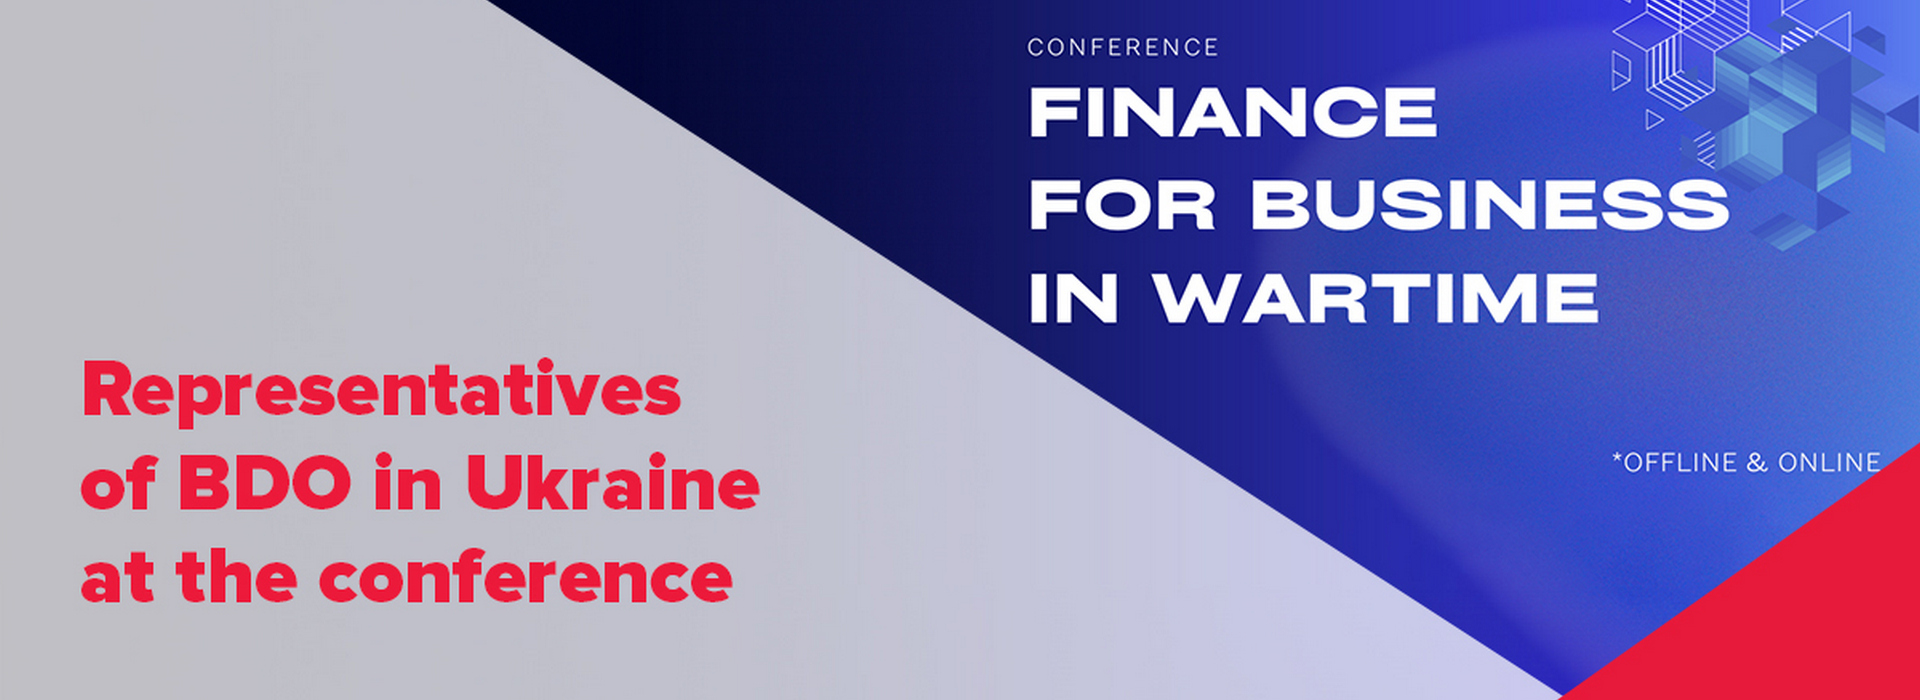 Representatives of BDO in Ukraine at the Conference “Finance for Business in Times of War”